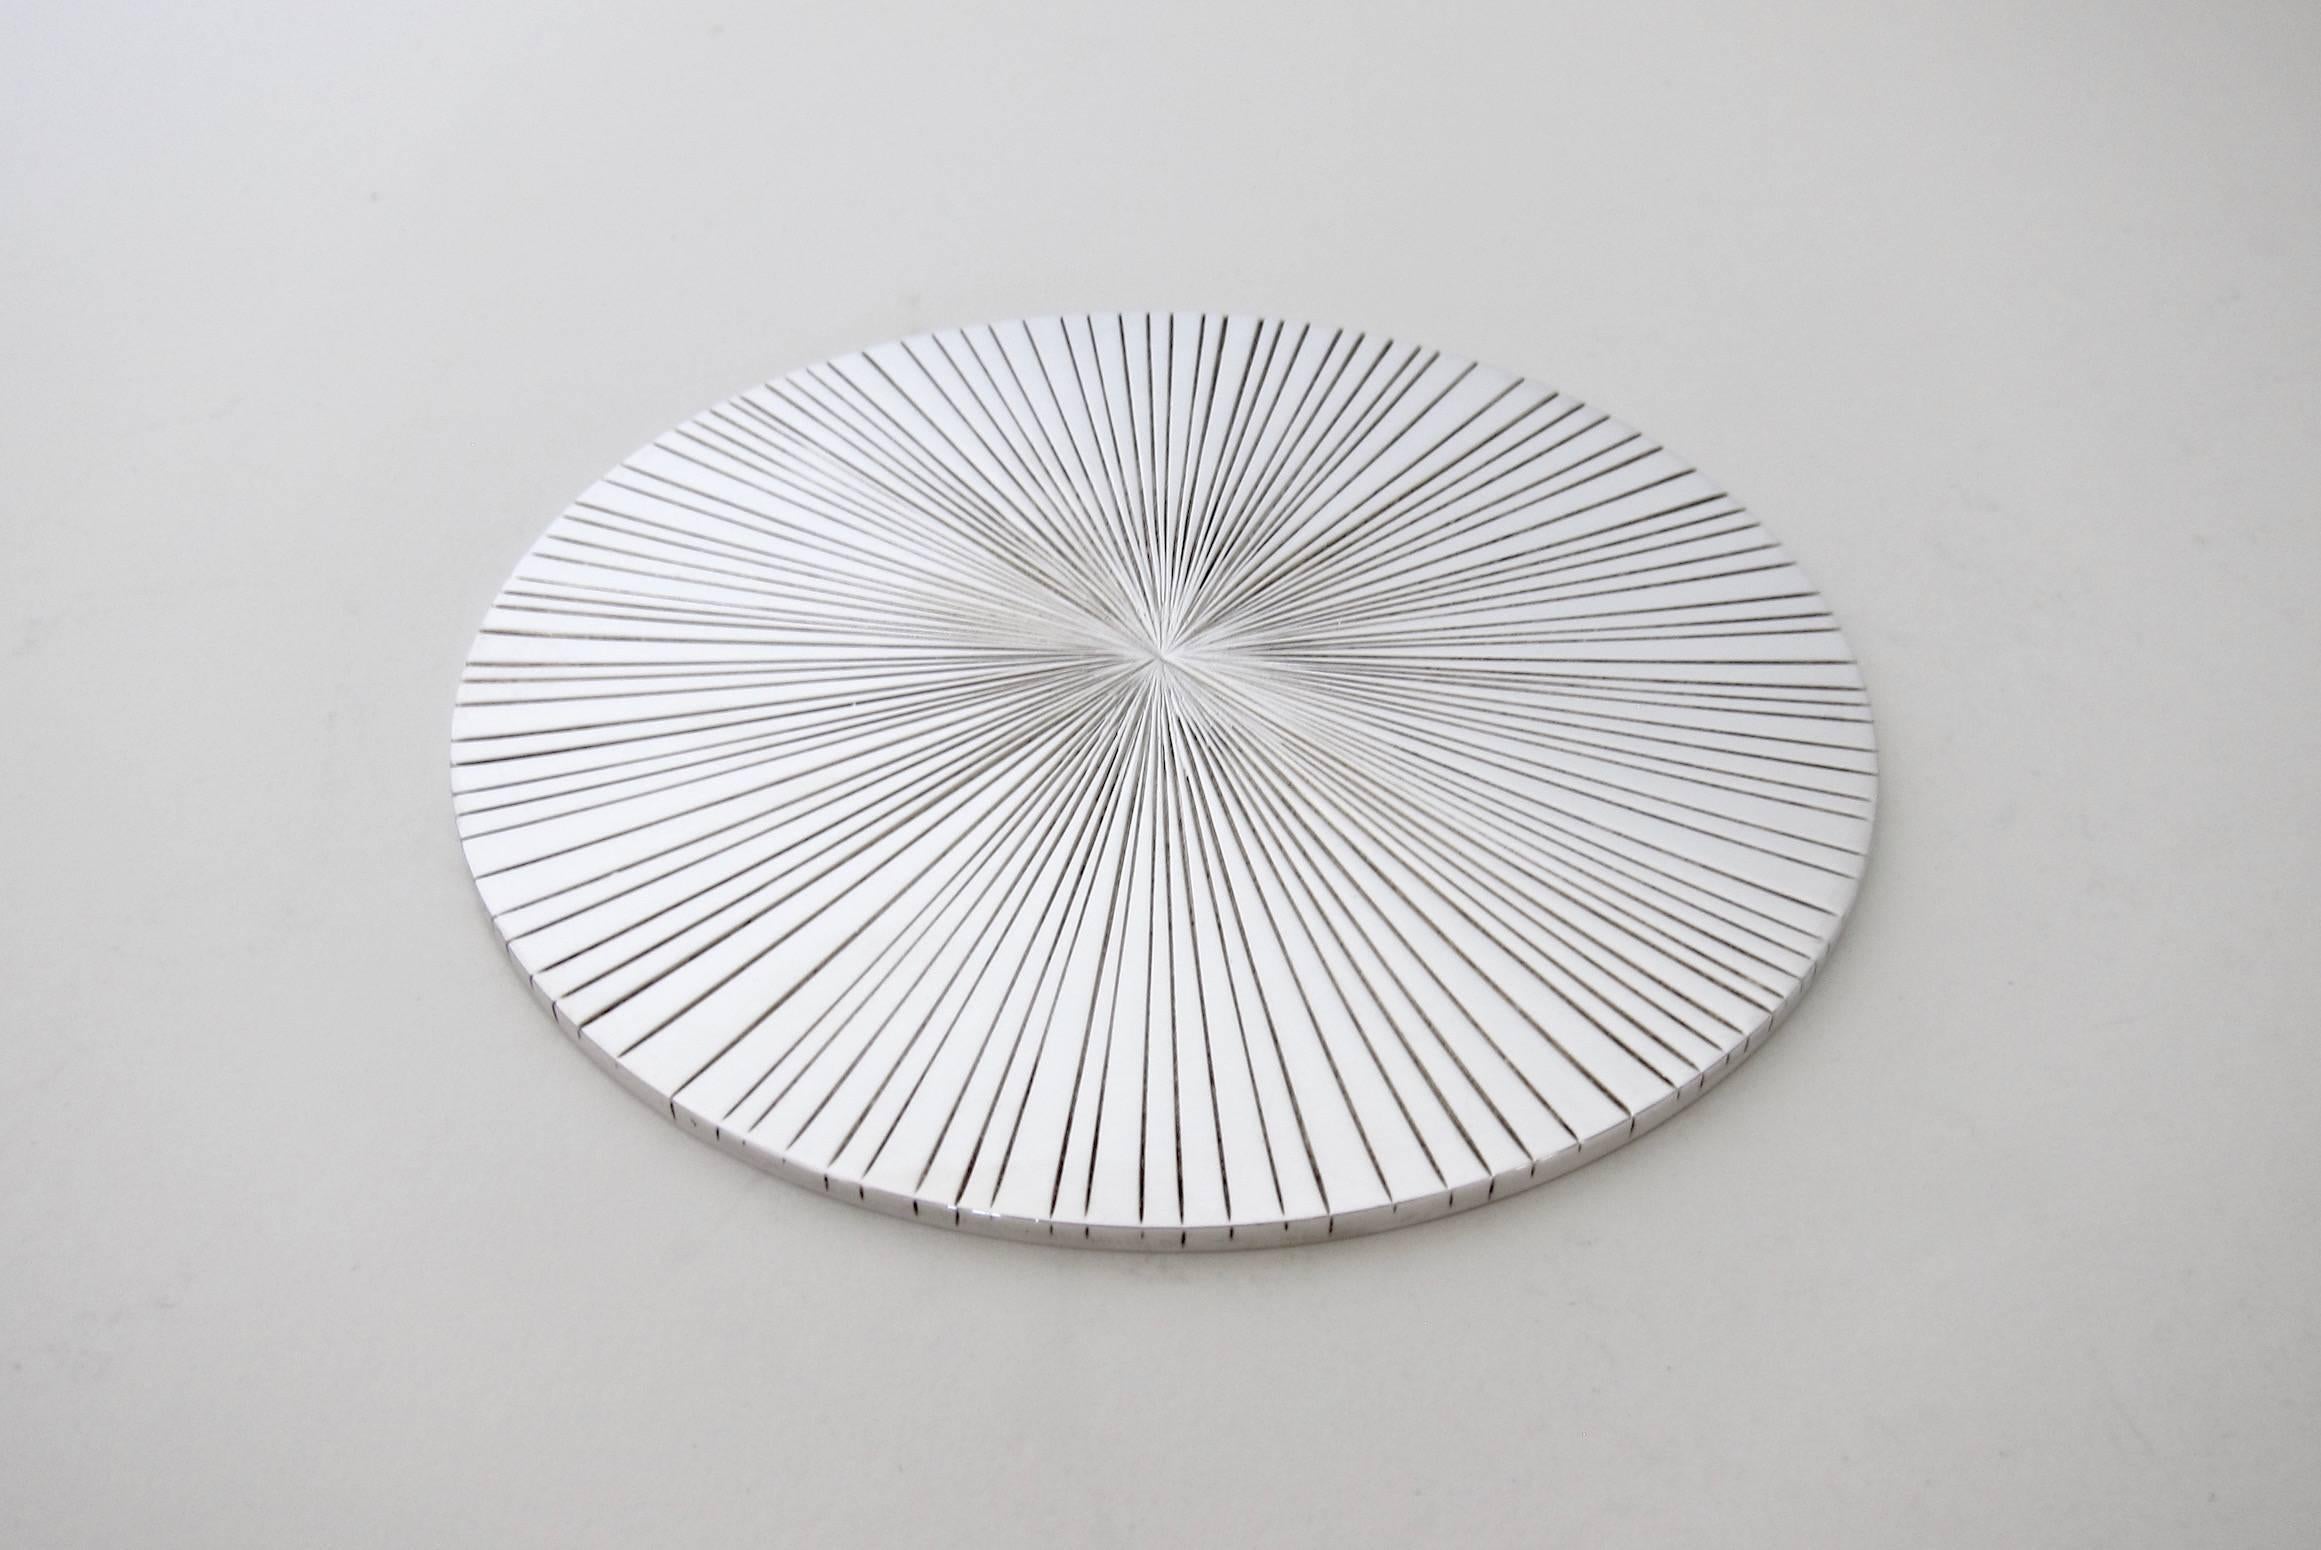 An exquisite wine bottle coaster from the Christofle Palm Collection, designed by Michele Oka Doner (b.1945) in 2003. Palm tree fronds inspired this collaboration and the design features incised lines (veins) radiating outward from the